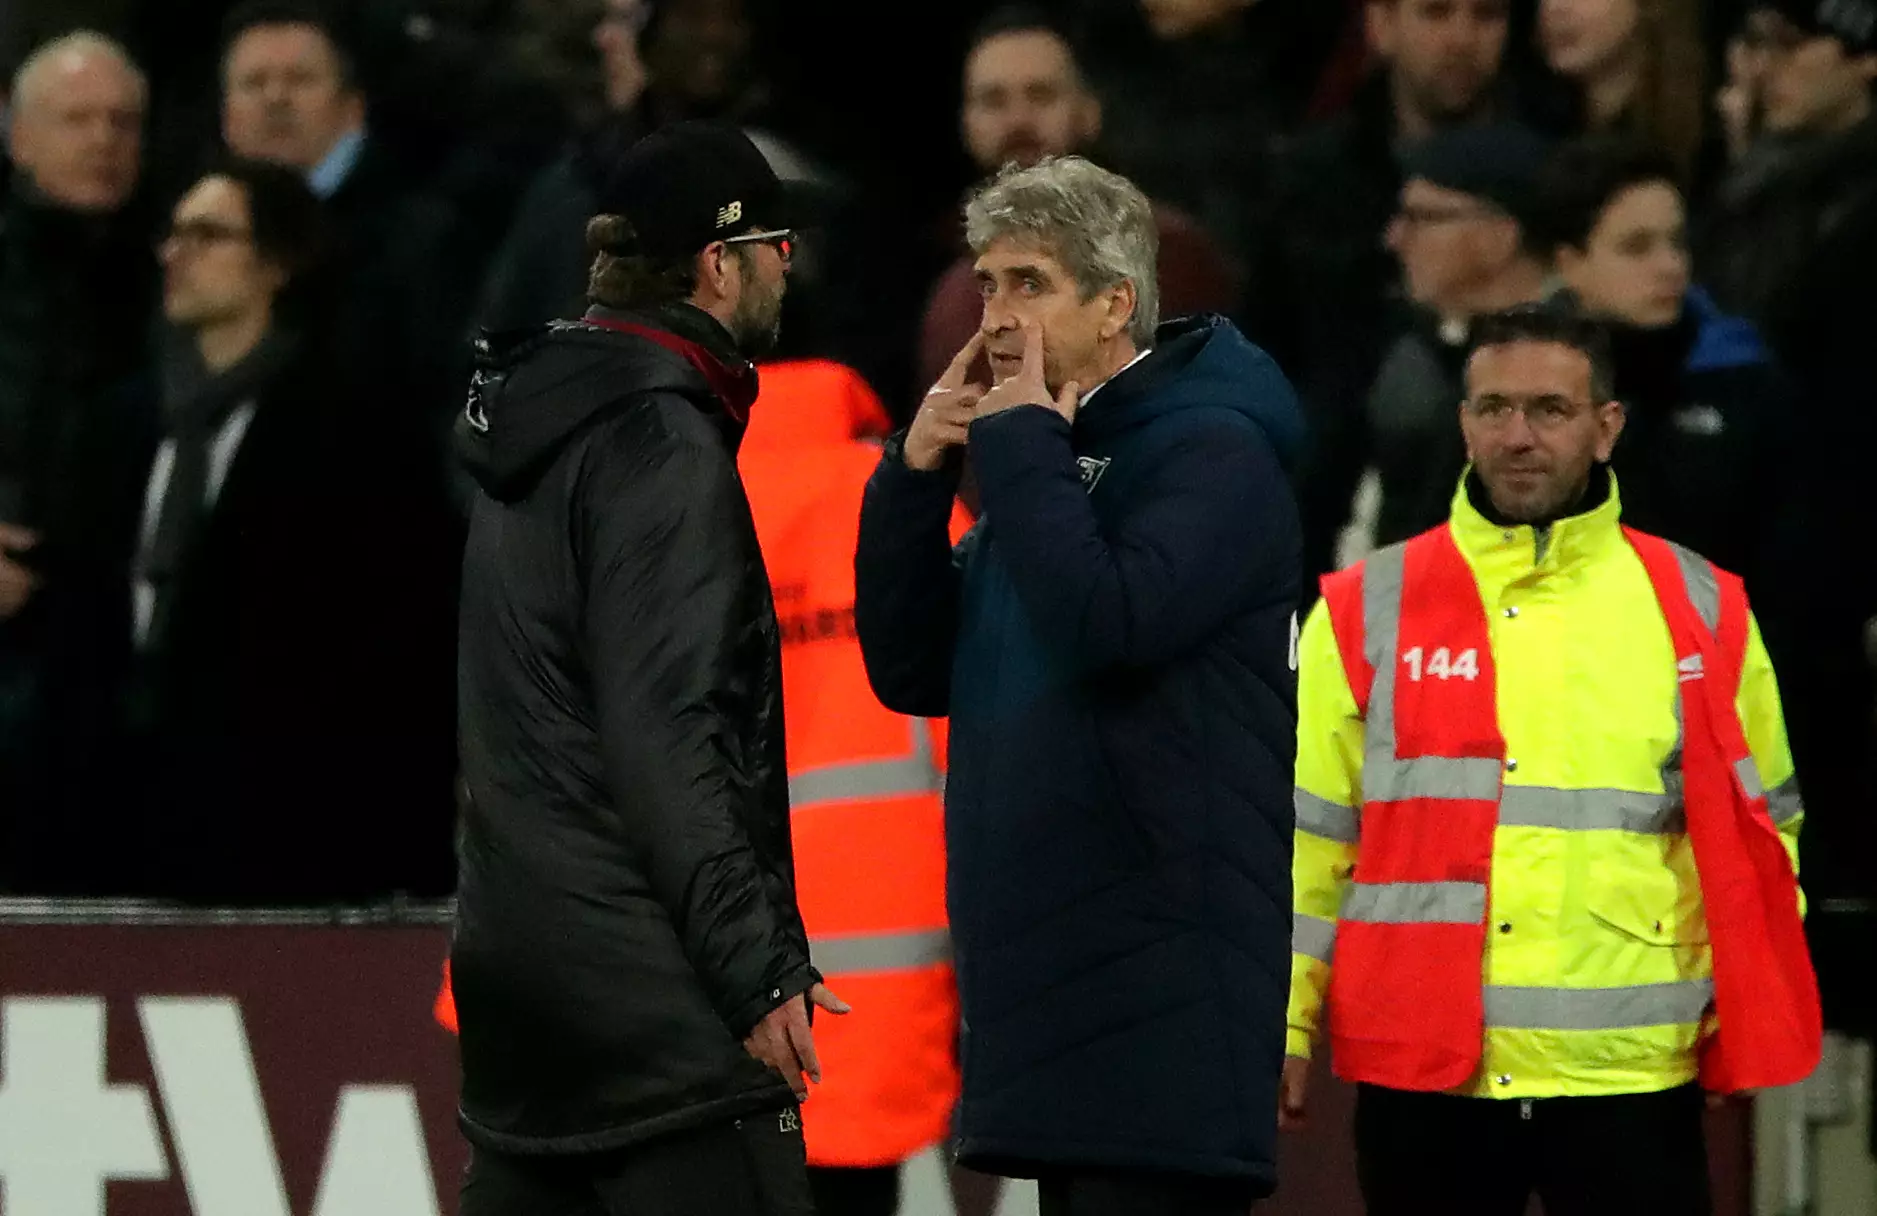 Pellegrini and Klopp exchanged words at full time. Image: PA Images